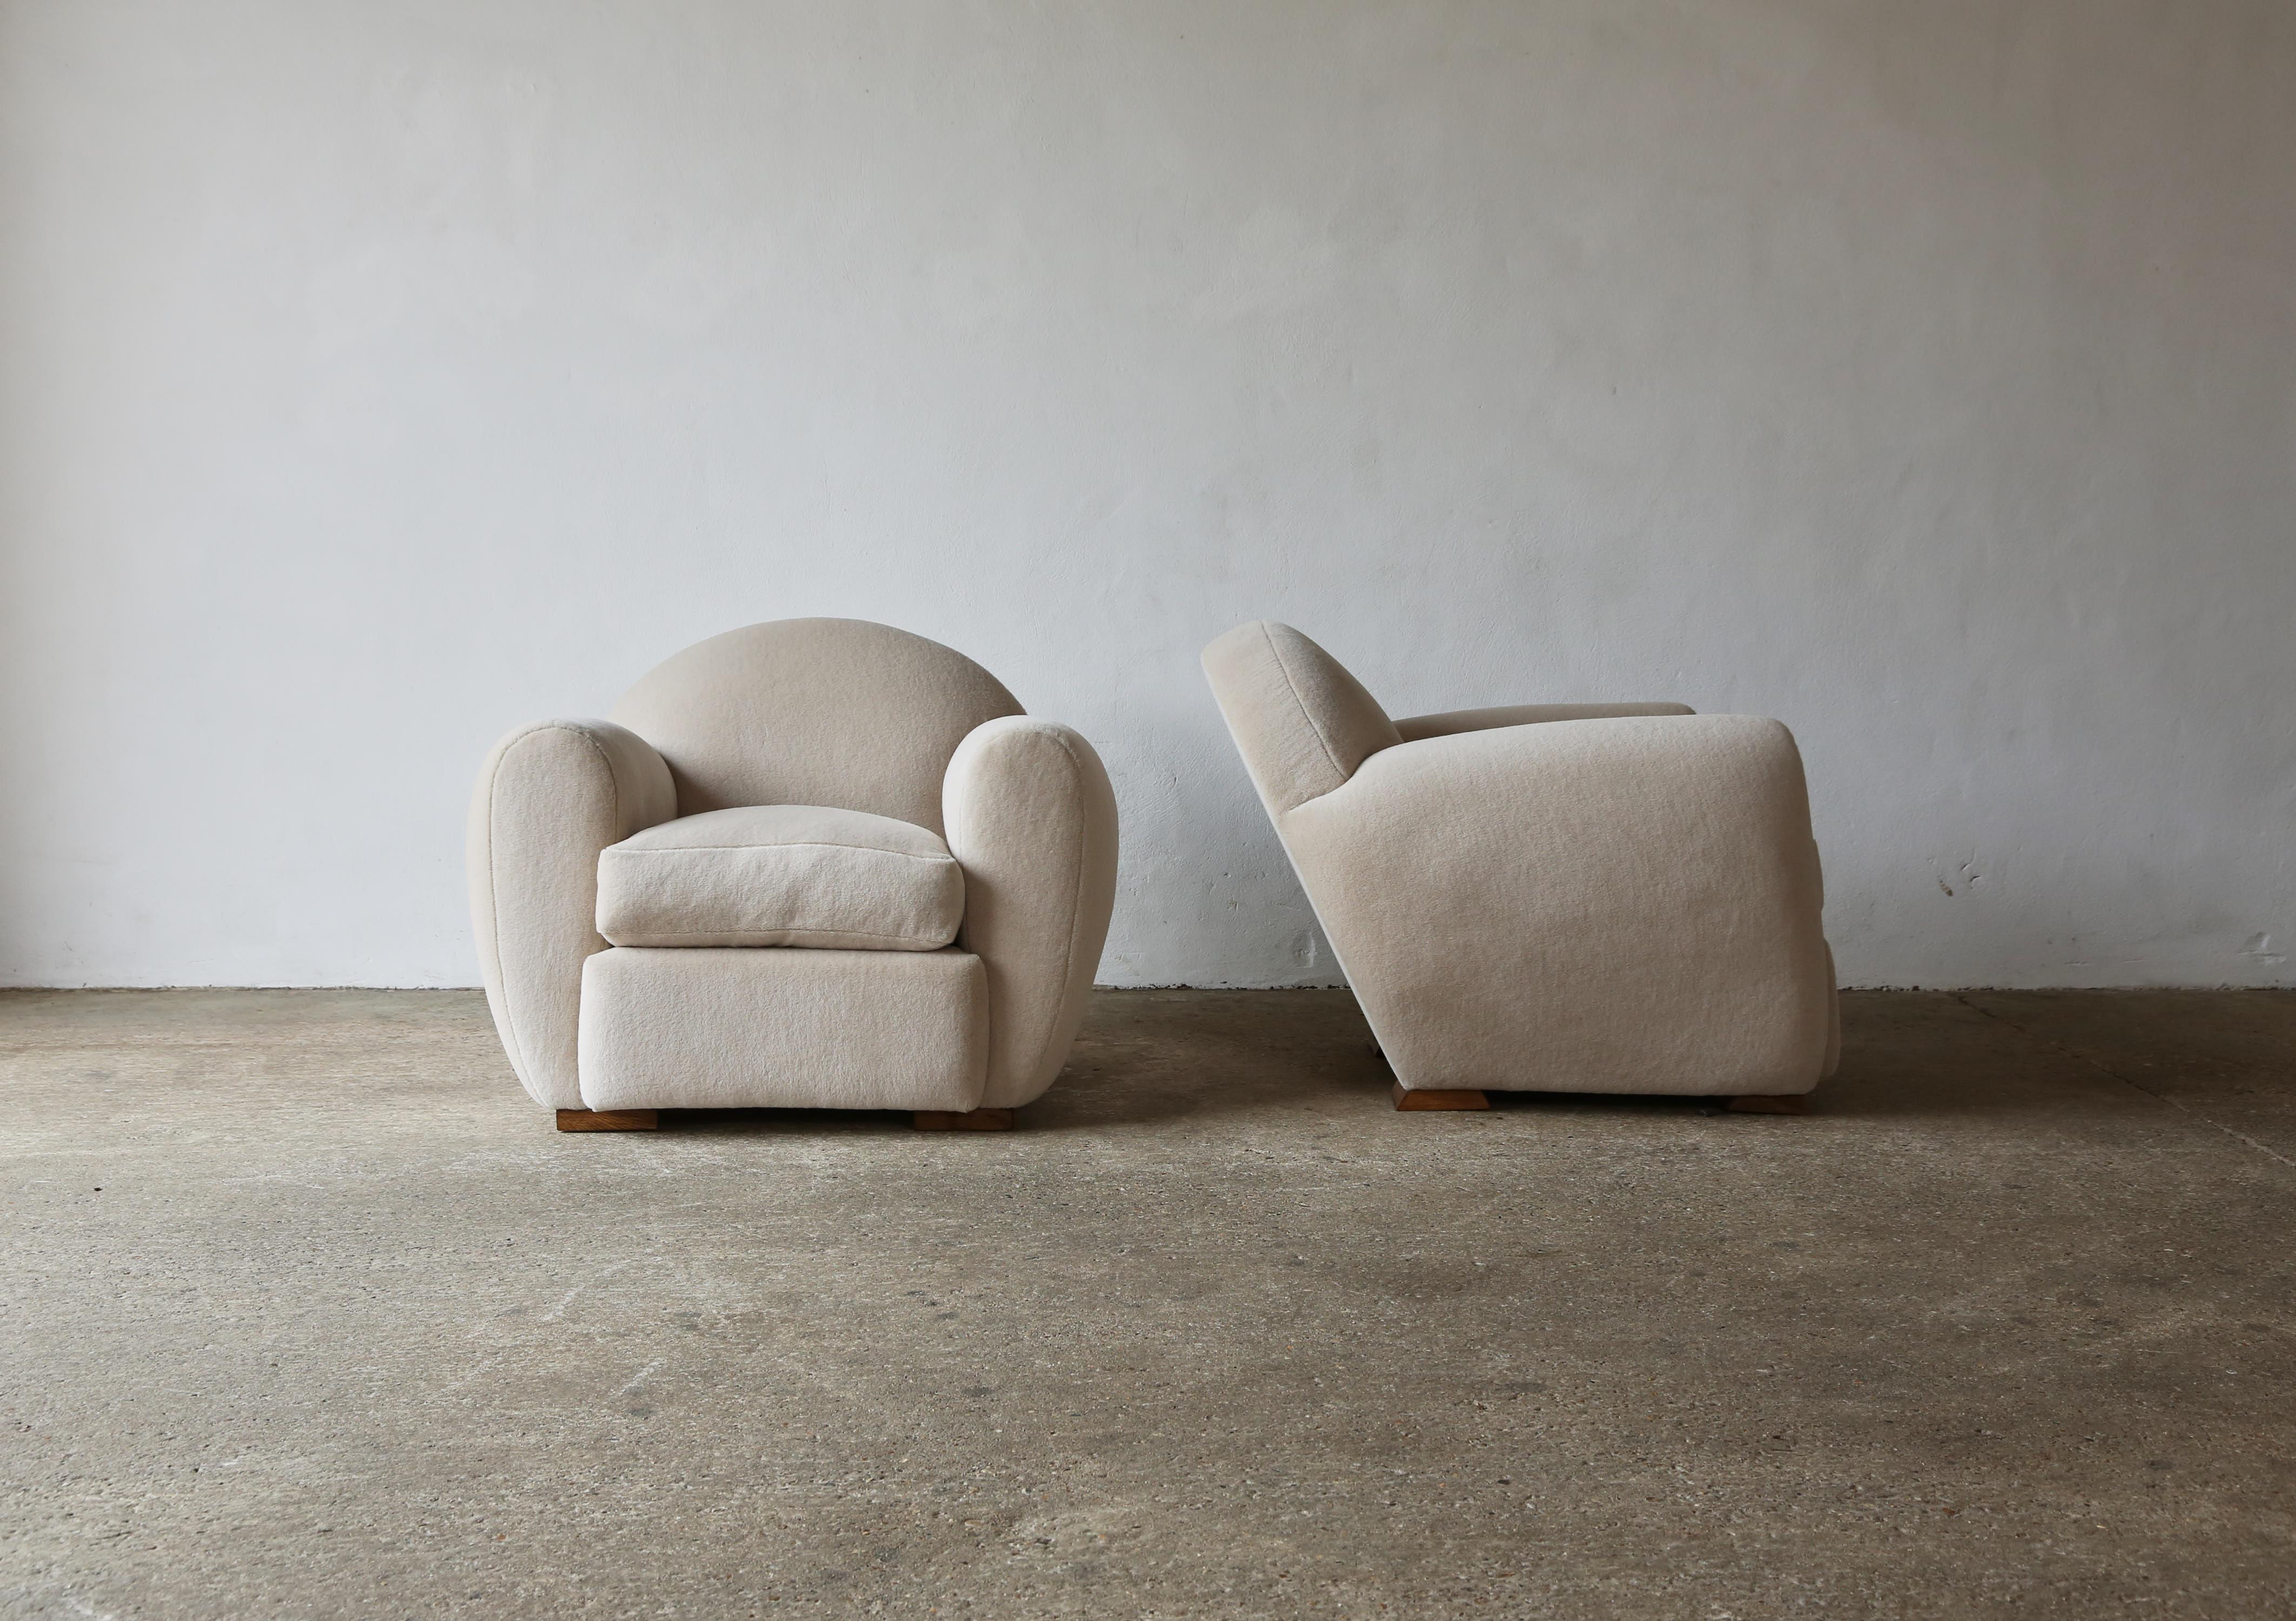 Superb pair of round, leaning modern club chairs, upholstered in pure Alpaca. High quality handmade beech frames and newly upholstered in a soft, ivory, premium 100% alpaca wool fabric. 

UK customers please note - displayed prices are exclusive